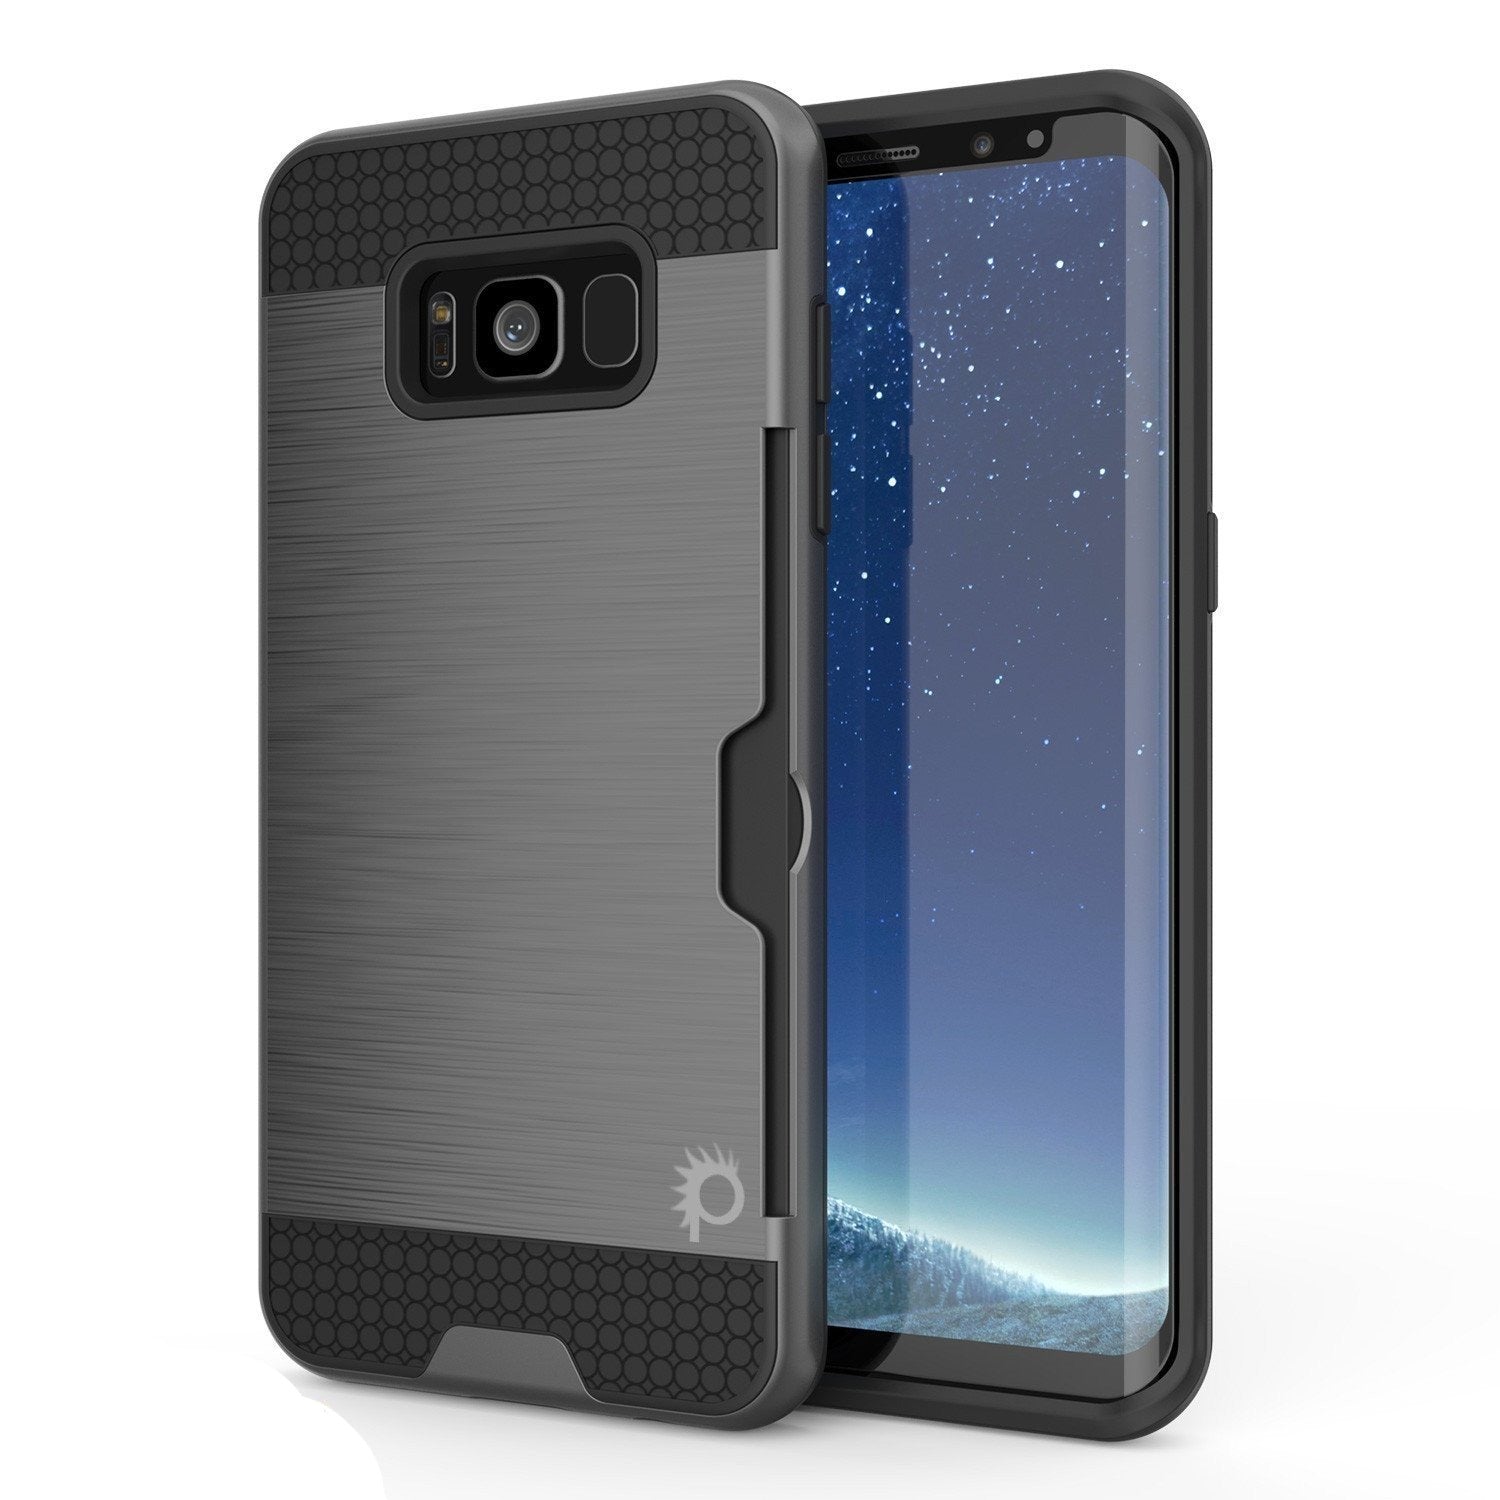 Galaxy S8 Case, PUNKcase [SLOT Series] [Slim Fit] Dual-Layer Armor Cover w/Integrated Anti-Shock System, Credit Card Slot & PUNKSHIELD Screen Protector for Samsung Galaxy S8[Grey]